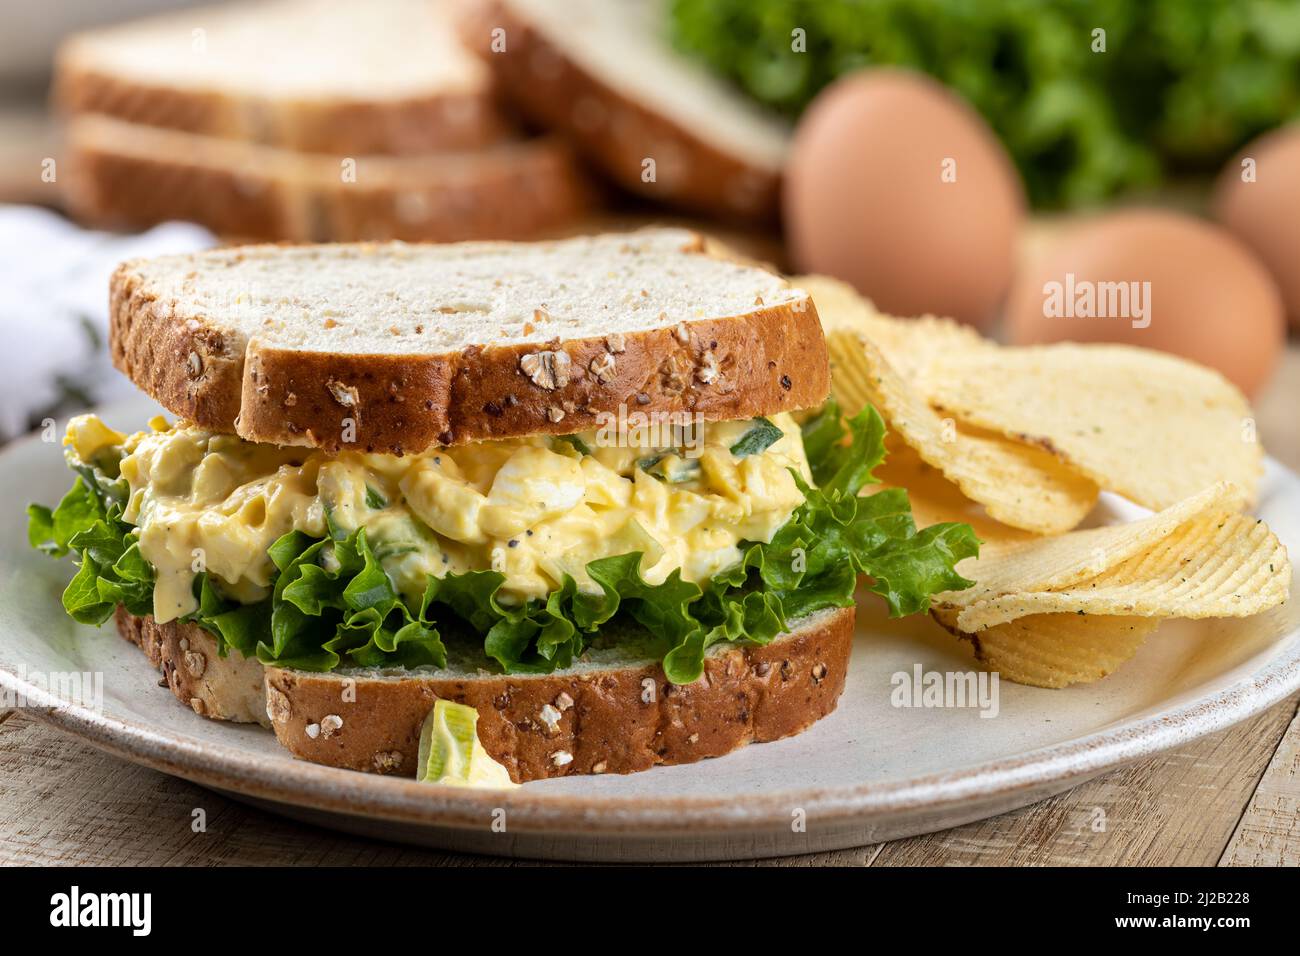 Closeup of egg salad and lettuce sandwich on whole grain bread with potato chips on a plate Stock Photo